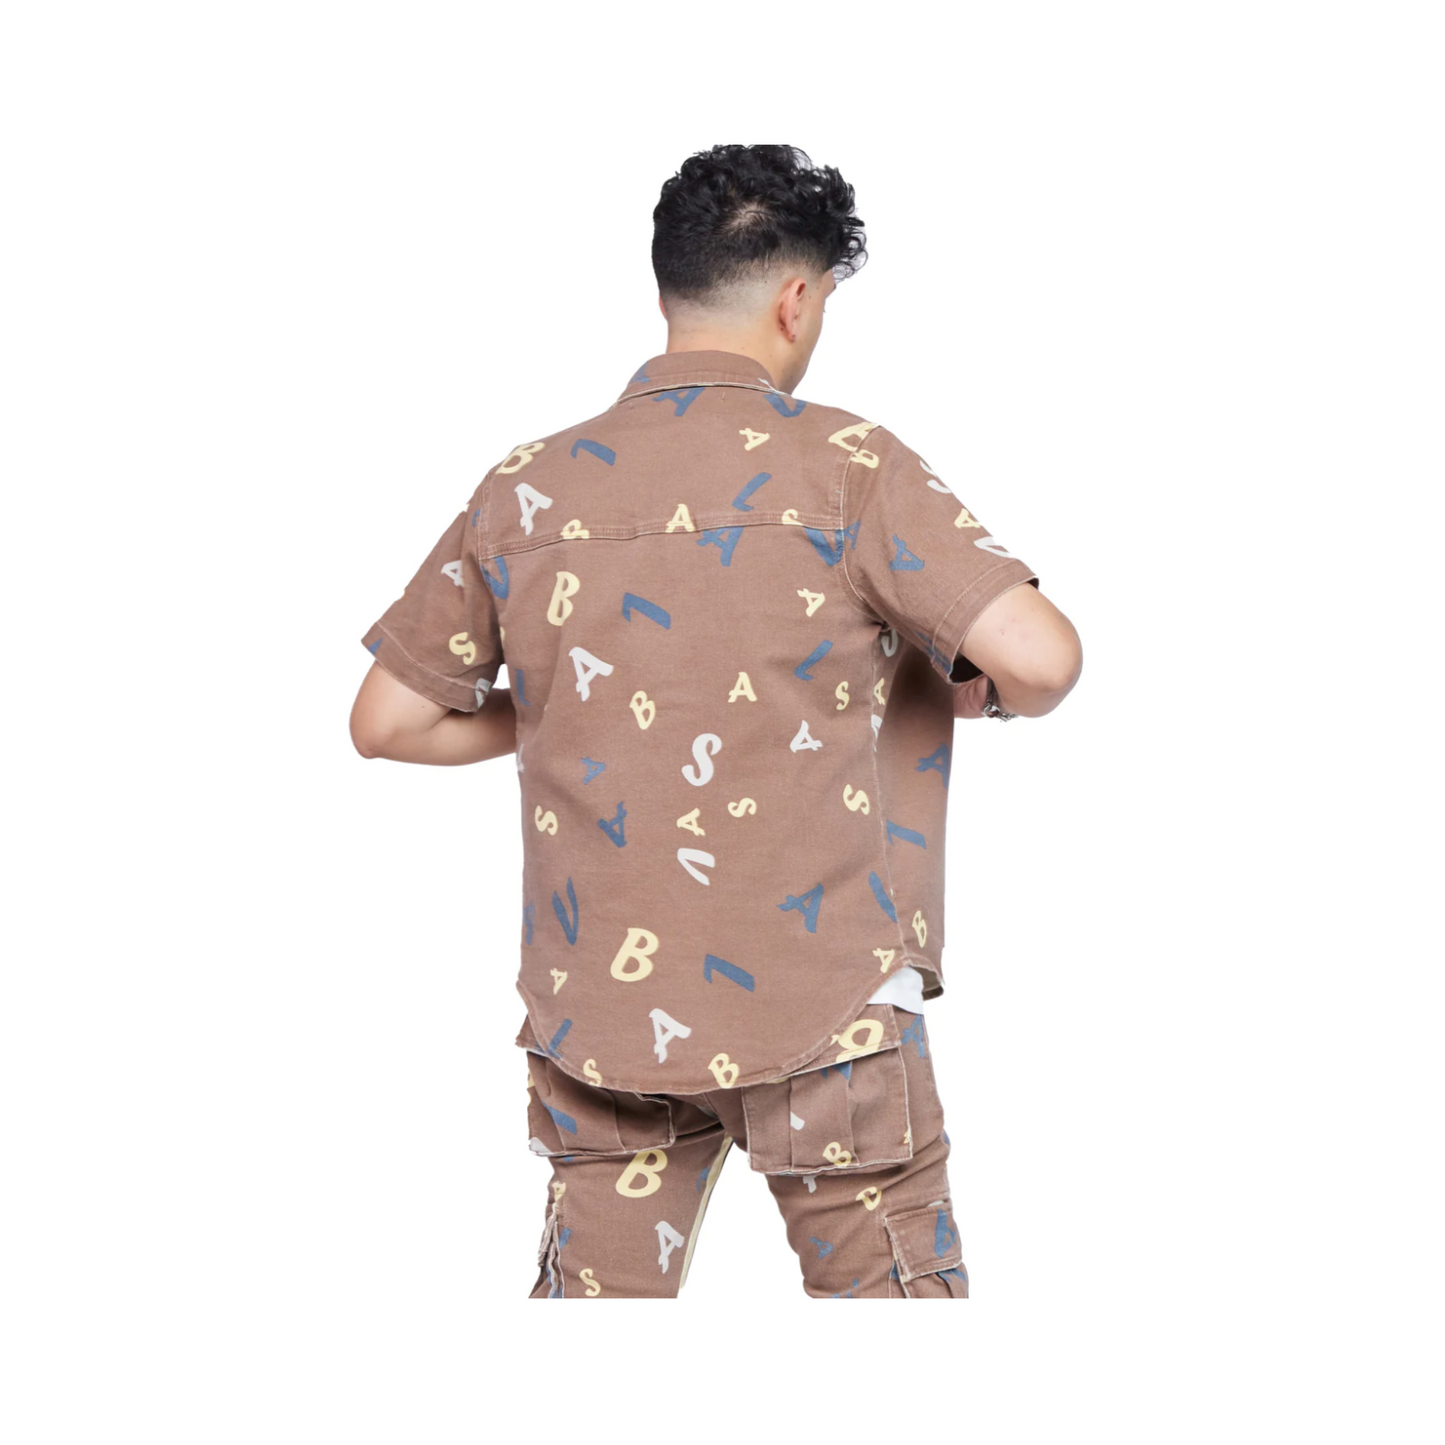 VALABASAS "WOVEN -PUZZLE" BUTTON UP